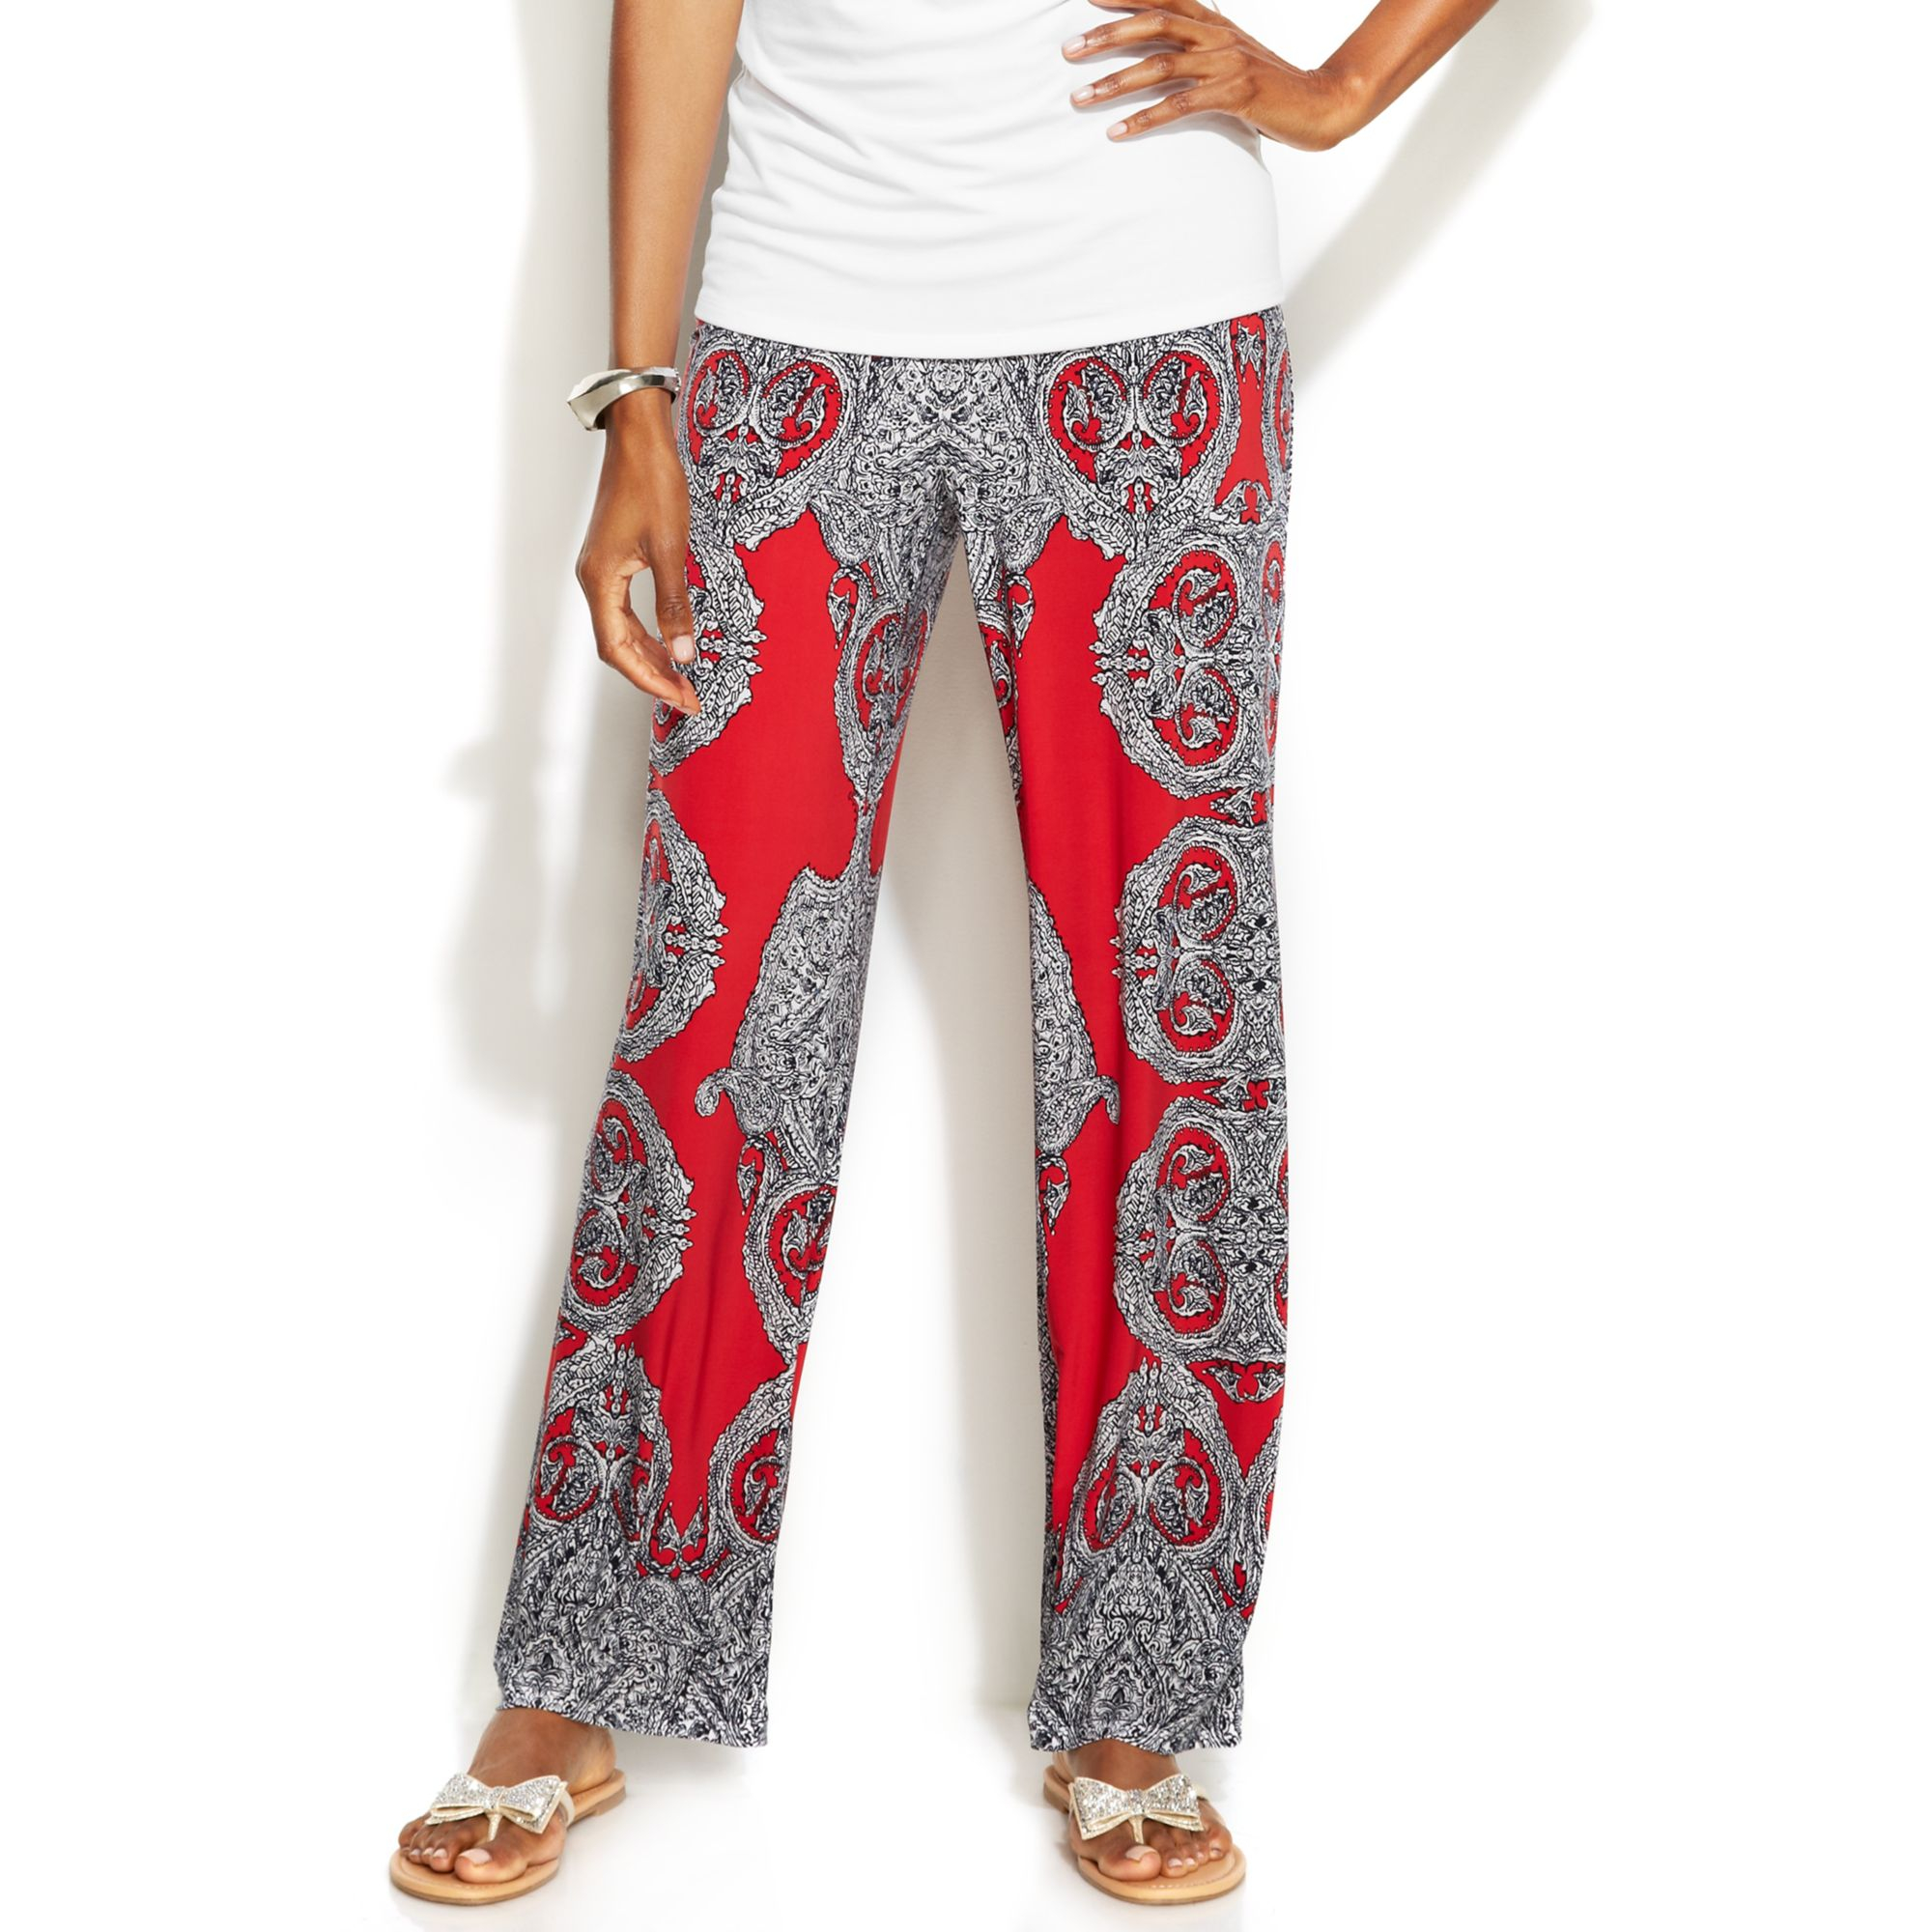 Lyst - Inc international concepts Printed Wideleg Soft Pants in Red